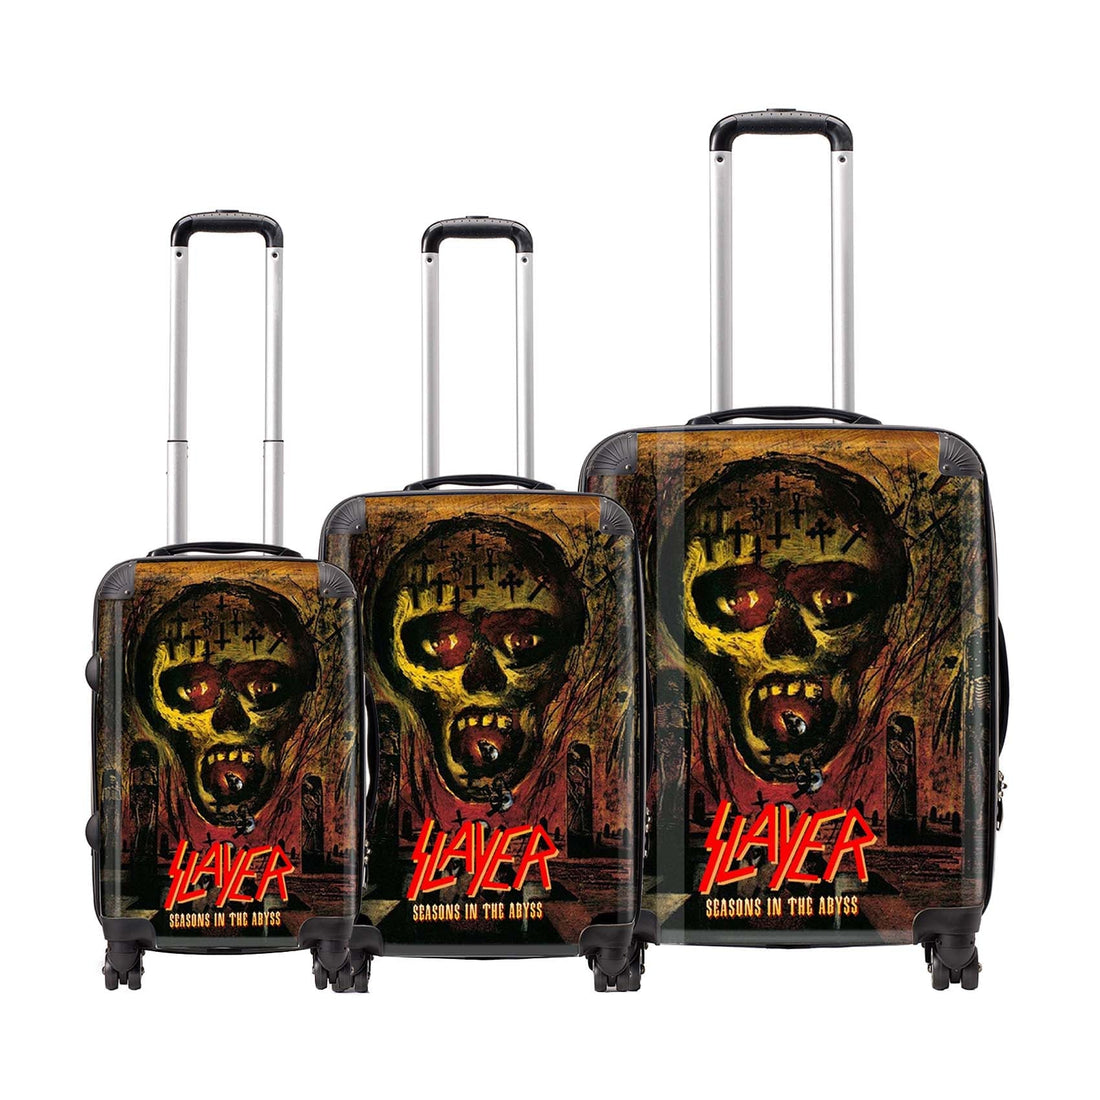 Rocksax Slayer Travel Bag Luggage - Seasons In The Abyss